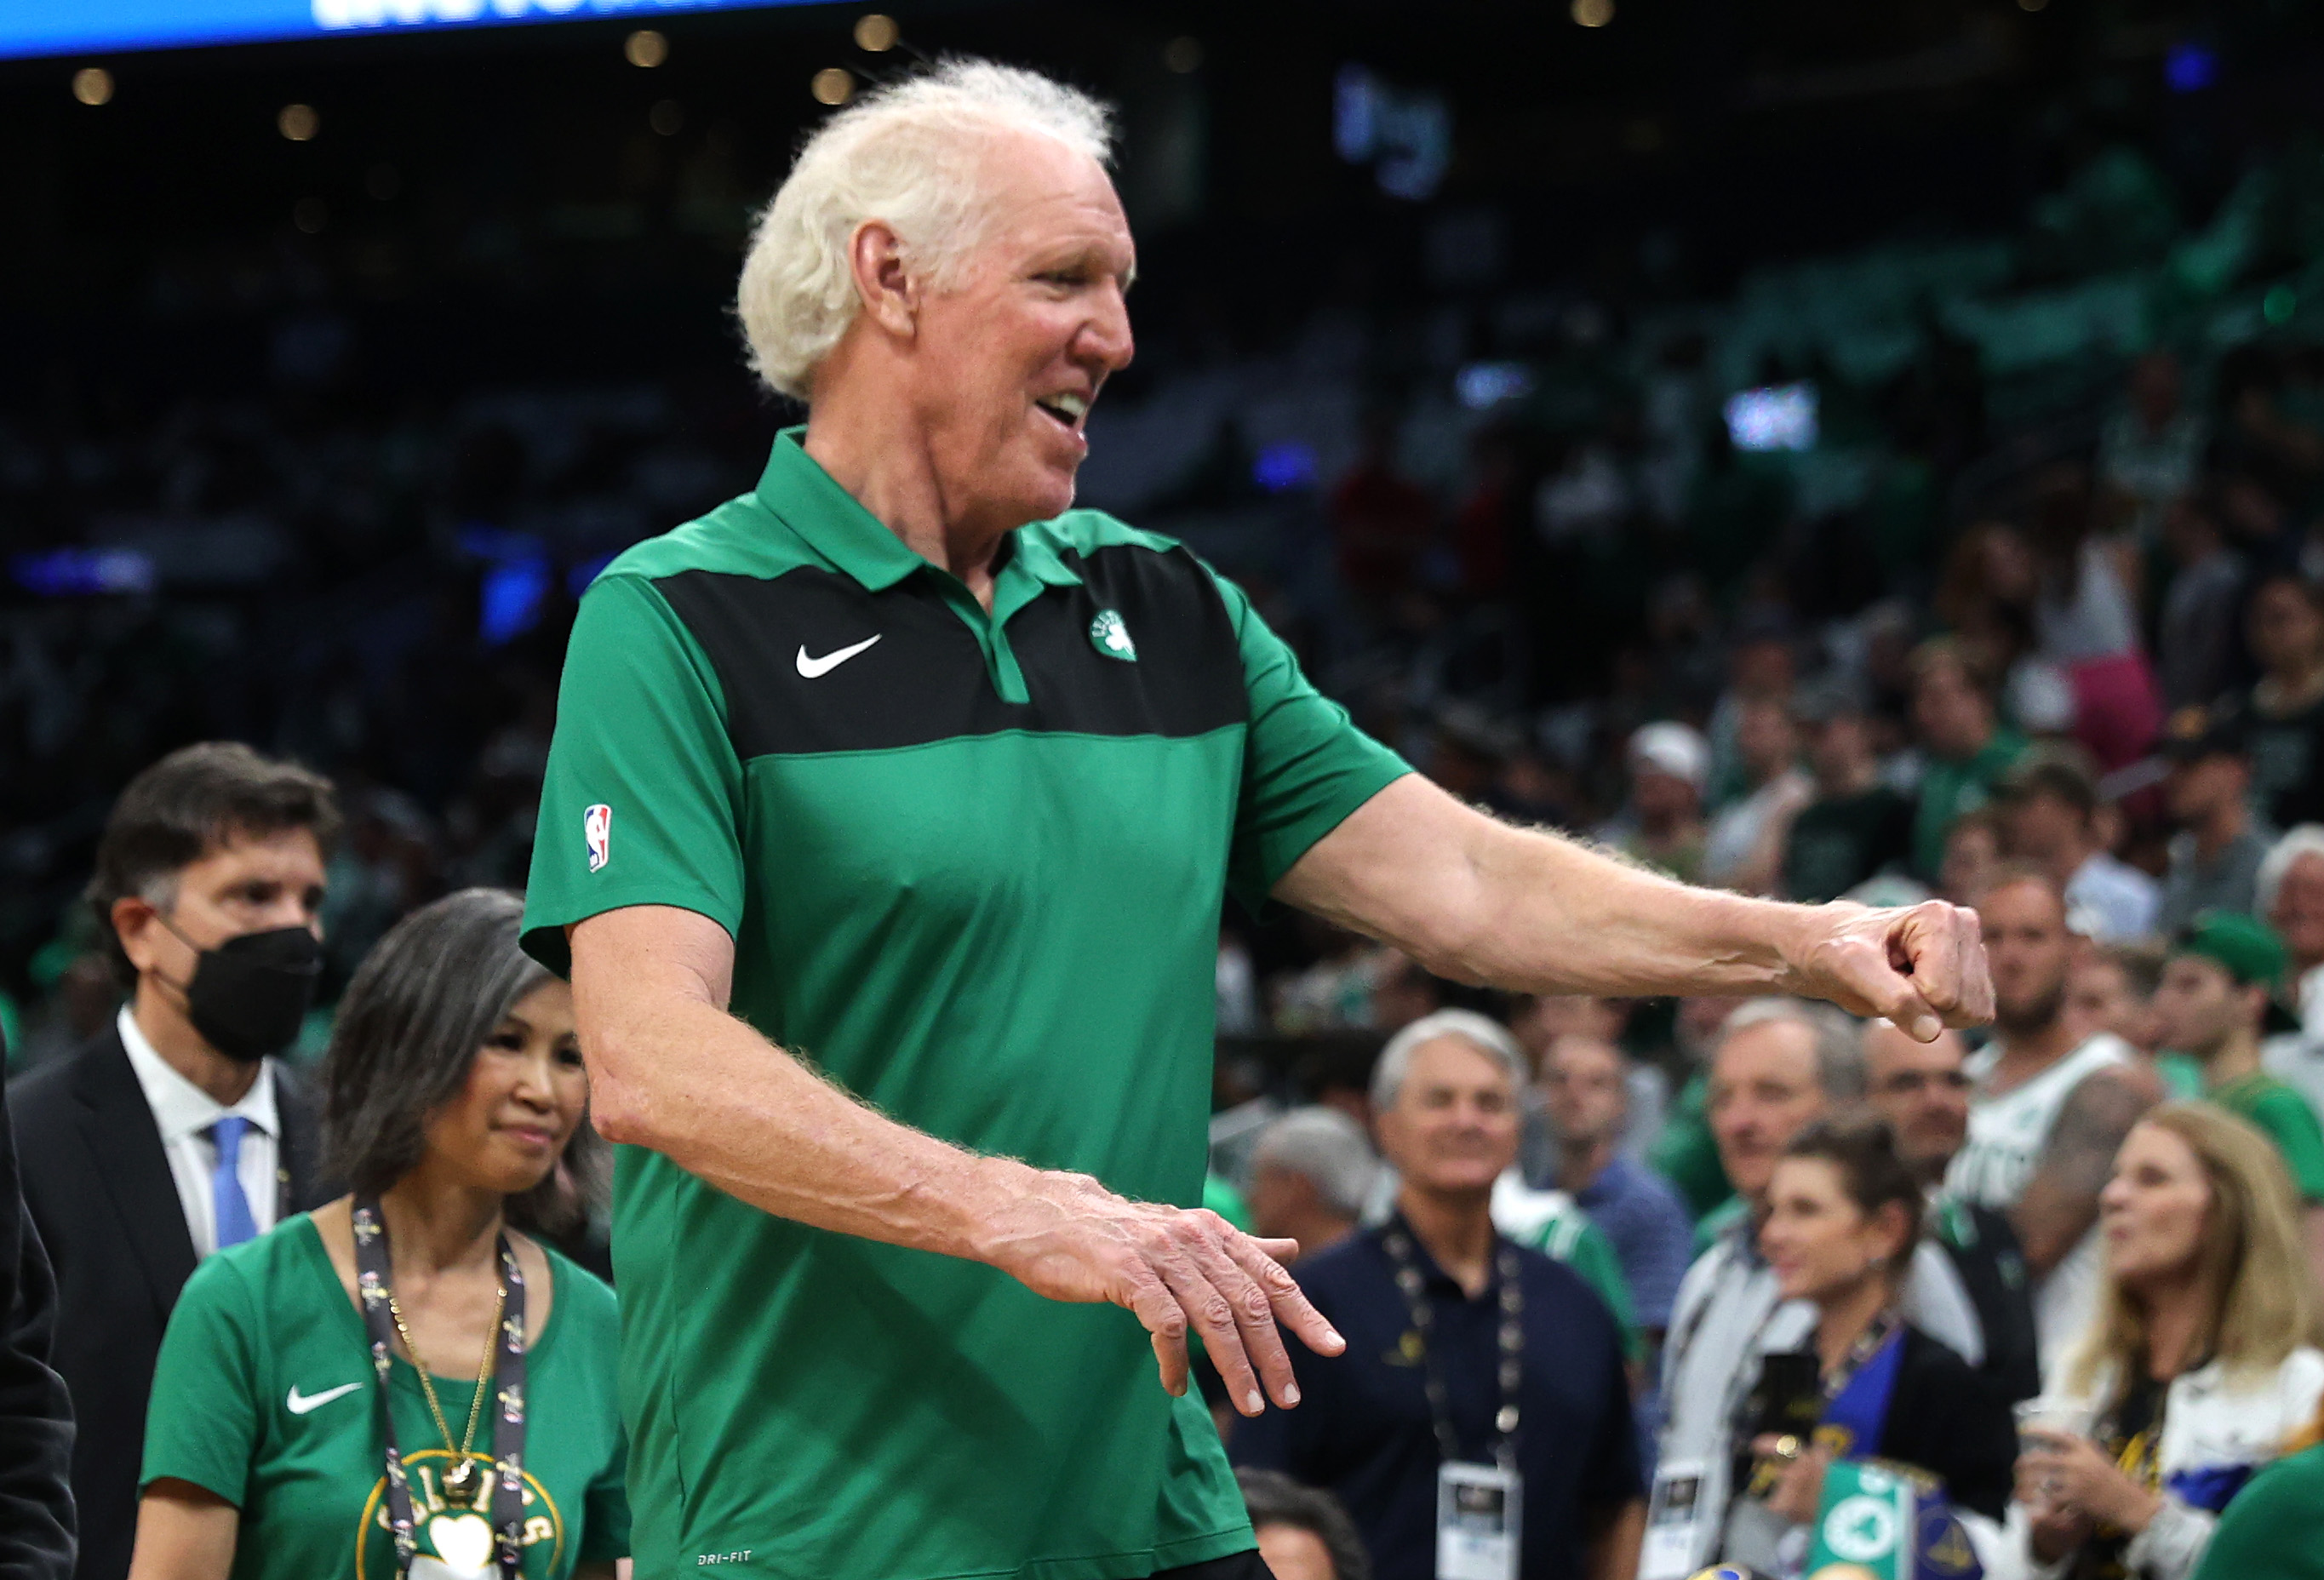 Bill Walton Rattles Off 6 Factors That Made Sports What They are Today, Including the NBA’s Most Important Person Ever